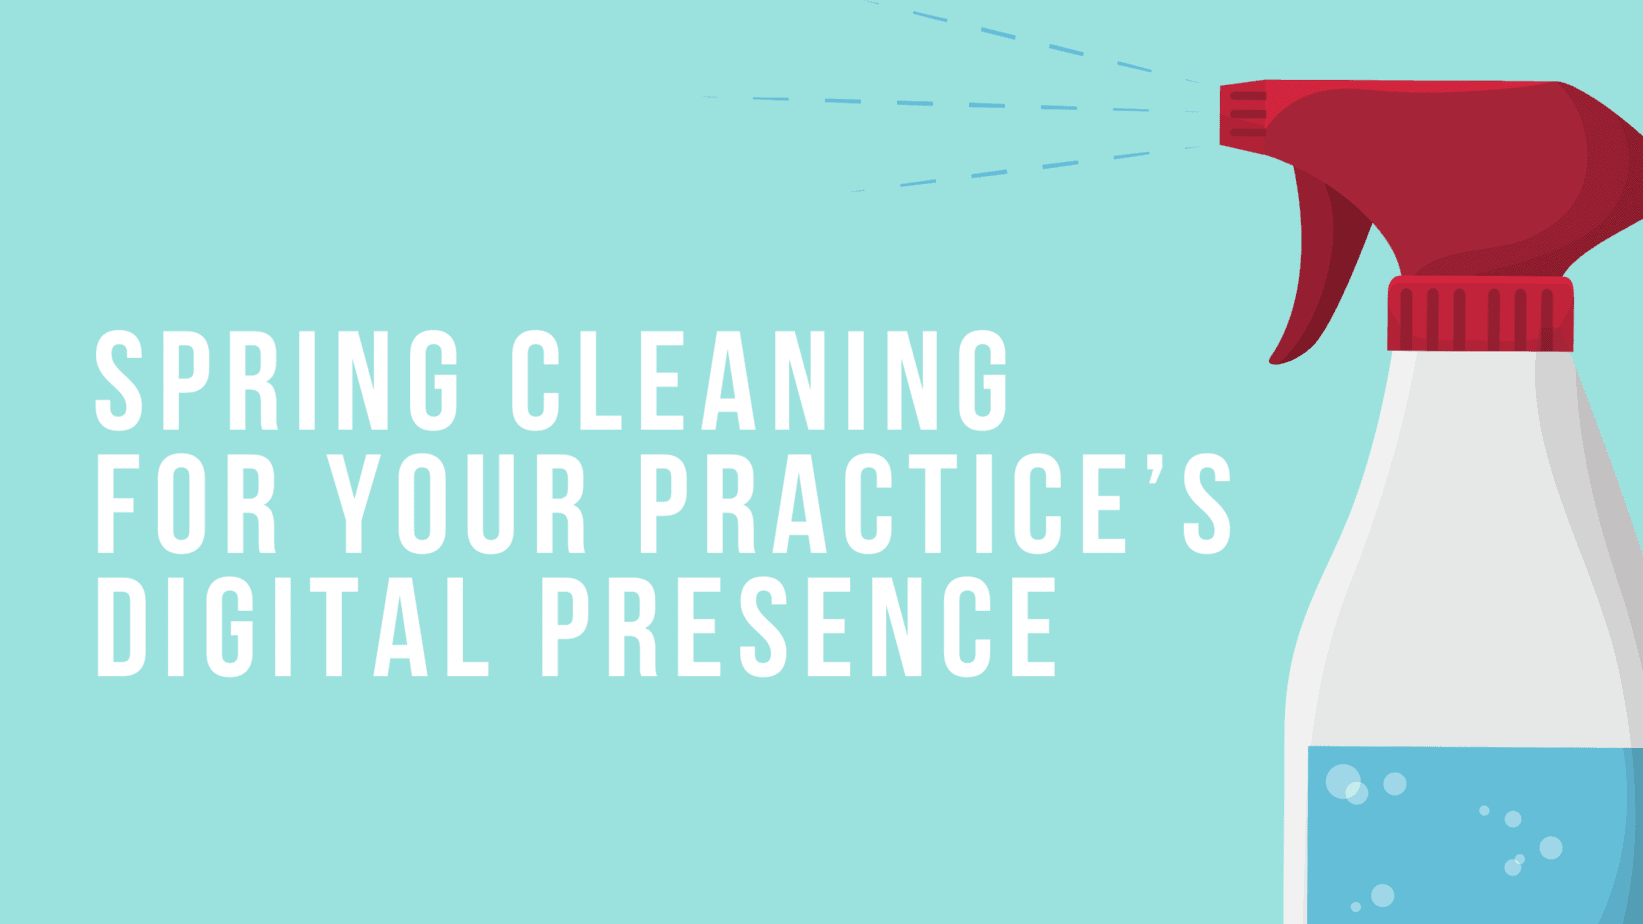 Featured image for “Spring Cleaning for Your Practice’s Digital Presence”